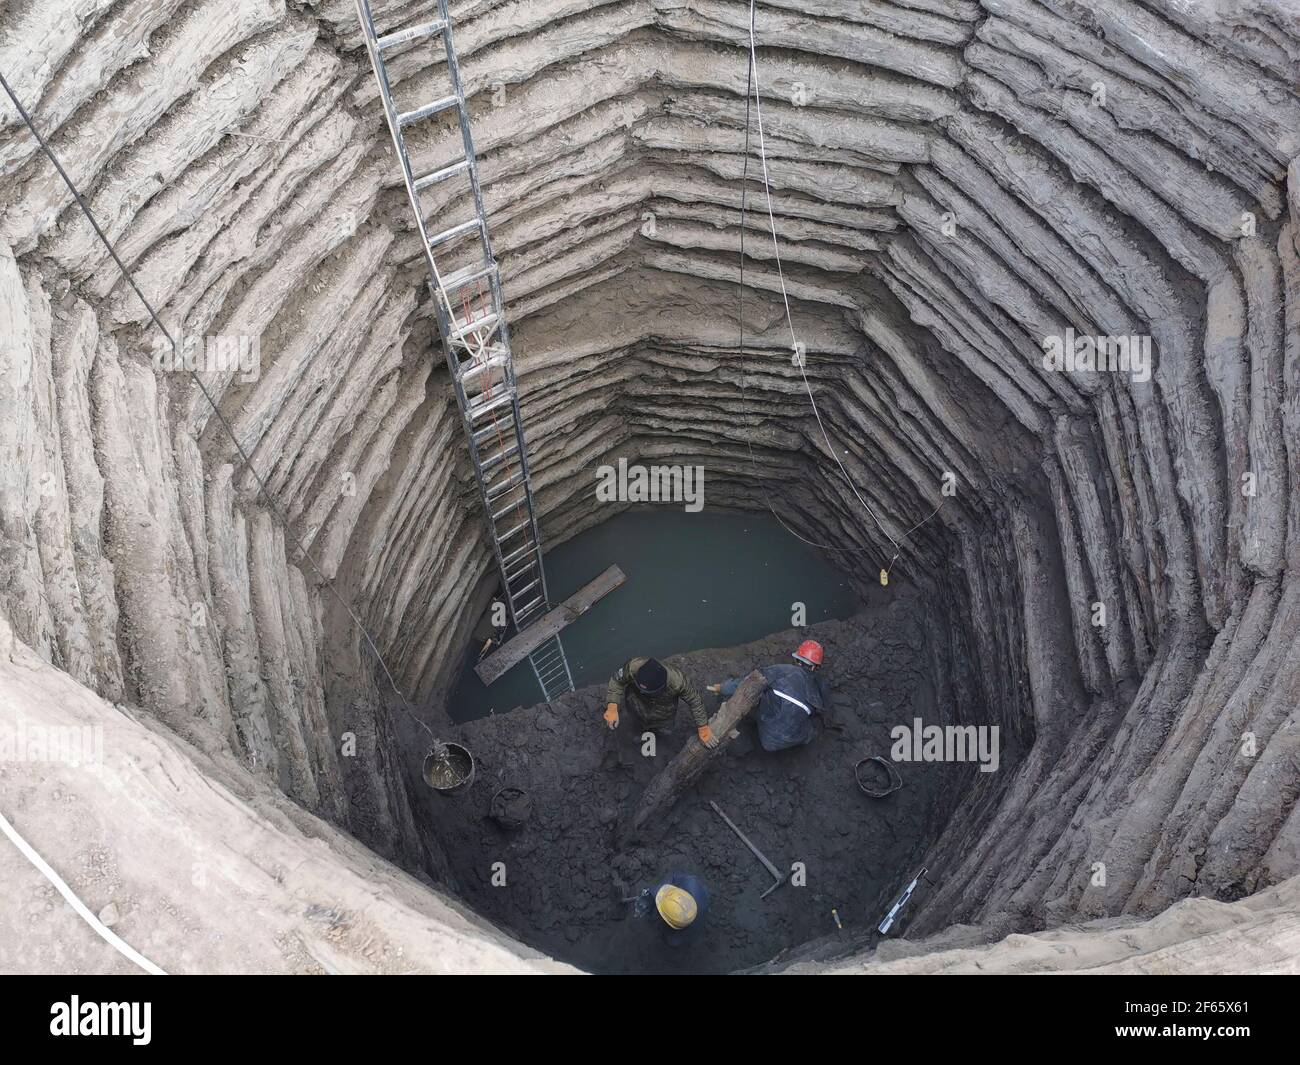 210330 taiyuan march 30 2021 xinhua file photo provided by the heritage management center in yangquan city of north chinas shanxi province shows researchers operating at the archaeological site of a 2000 year old well recently found in the province an ancient nine sided well bearing a wooden structure with a history of over 2000 years was discovered in north chinas shanxi province archaeologists announced tuesday heritage management center in yangquan cityhandout via xinhua 2F65X61